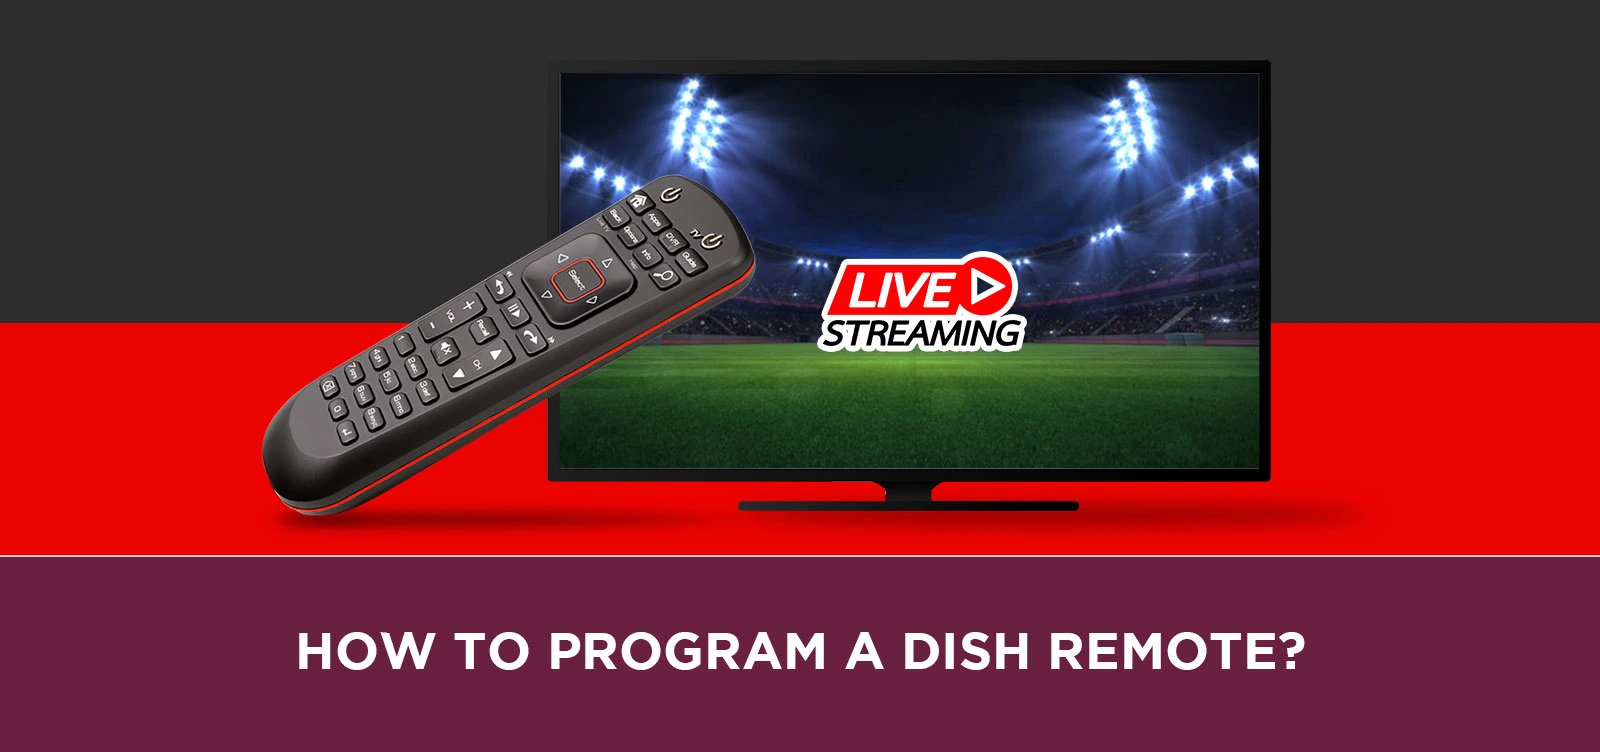 How To Program a DISH Remote?